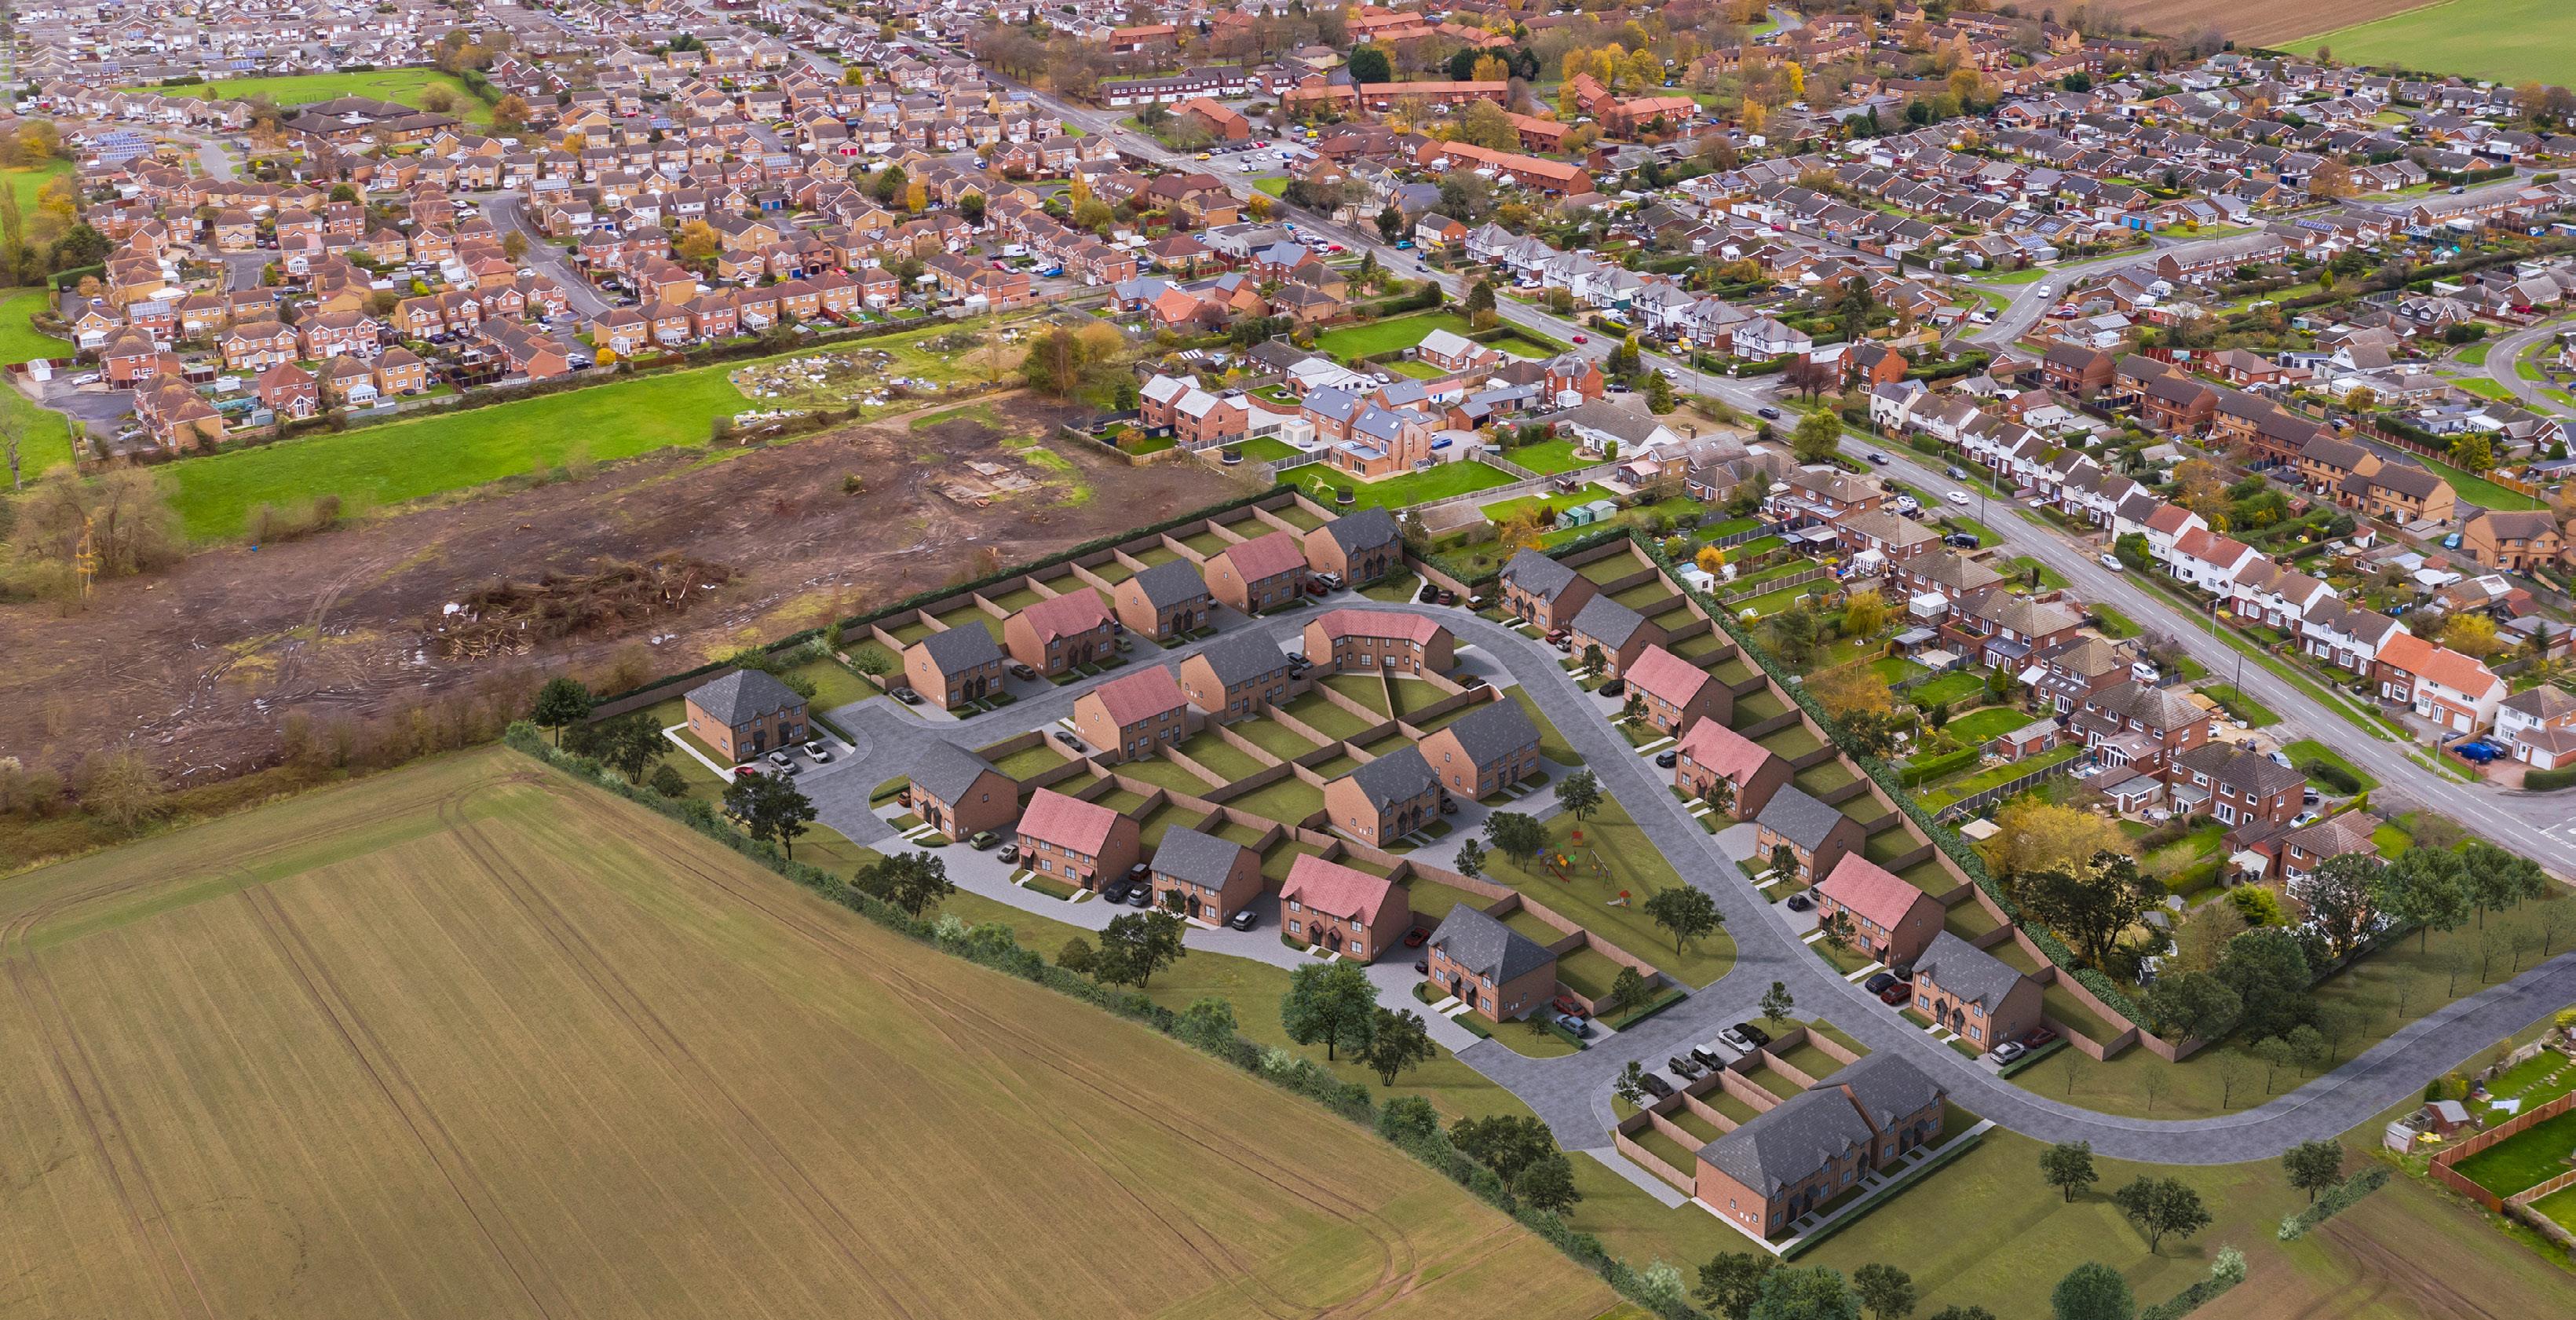 Longhurst Group unveils plans for 53 affordable homes near Lincoln